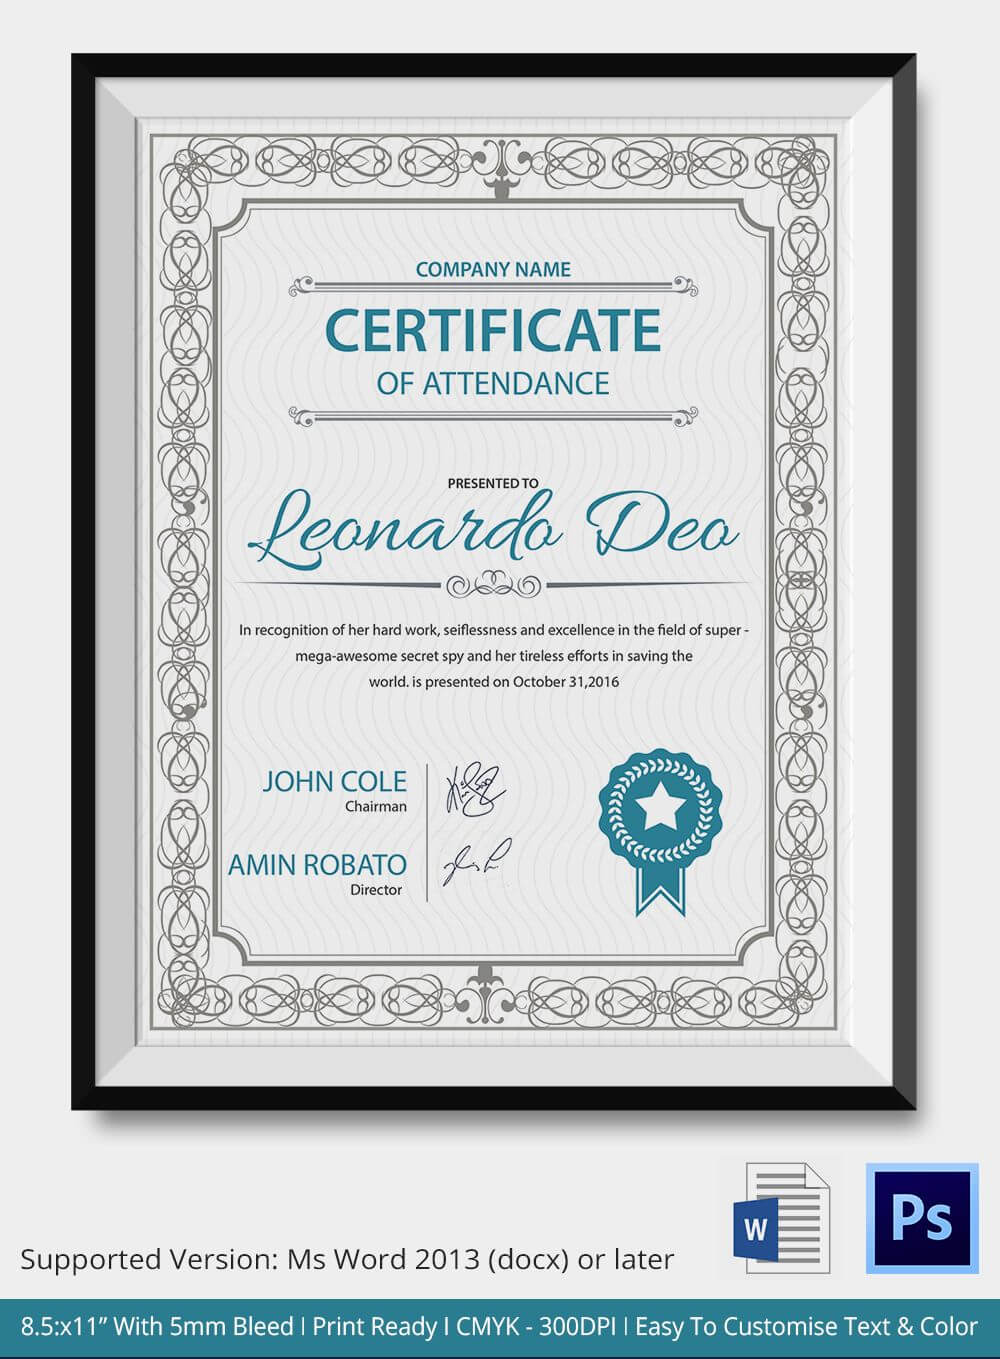 Professional Editable Certificate Of Attendance Template With Professional Certificate Templates For Word